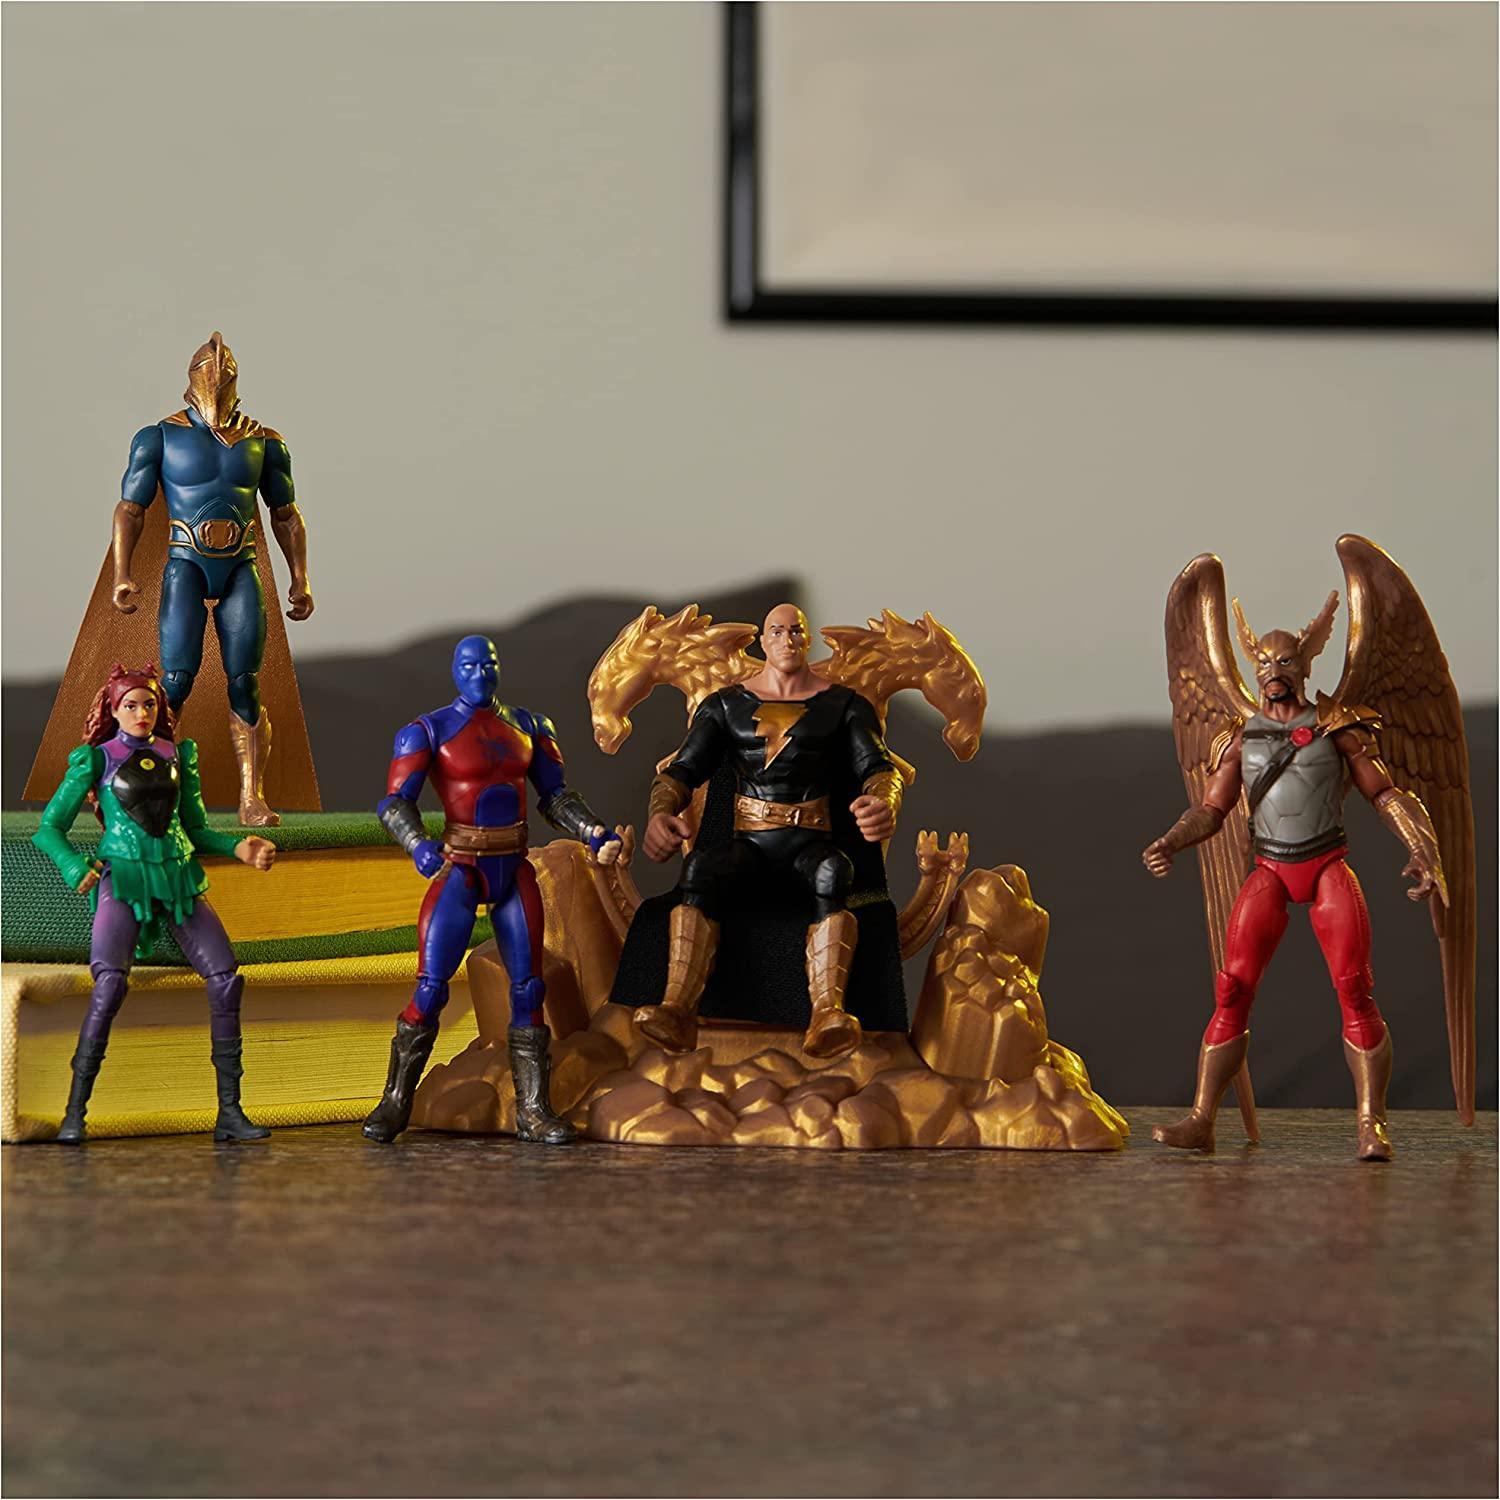 DC Comics, Black Adam and Justice Society Set, 4-inch Black Adam Toy Figures and Throne | Hawkman, Dr. Fate, Atom Smasher, Cyclone - BumbleToys - 5-7 Years, Action Battling, Avengers, Black Adam, Boys, DC, OXE, Pre-Order